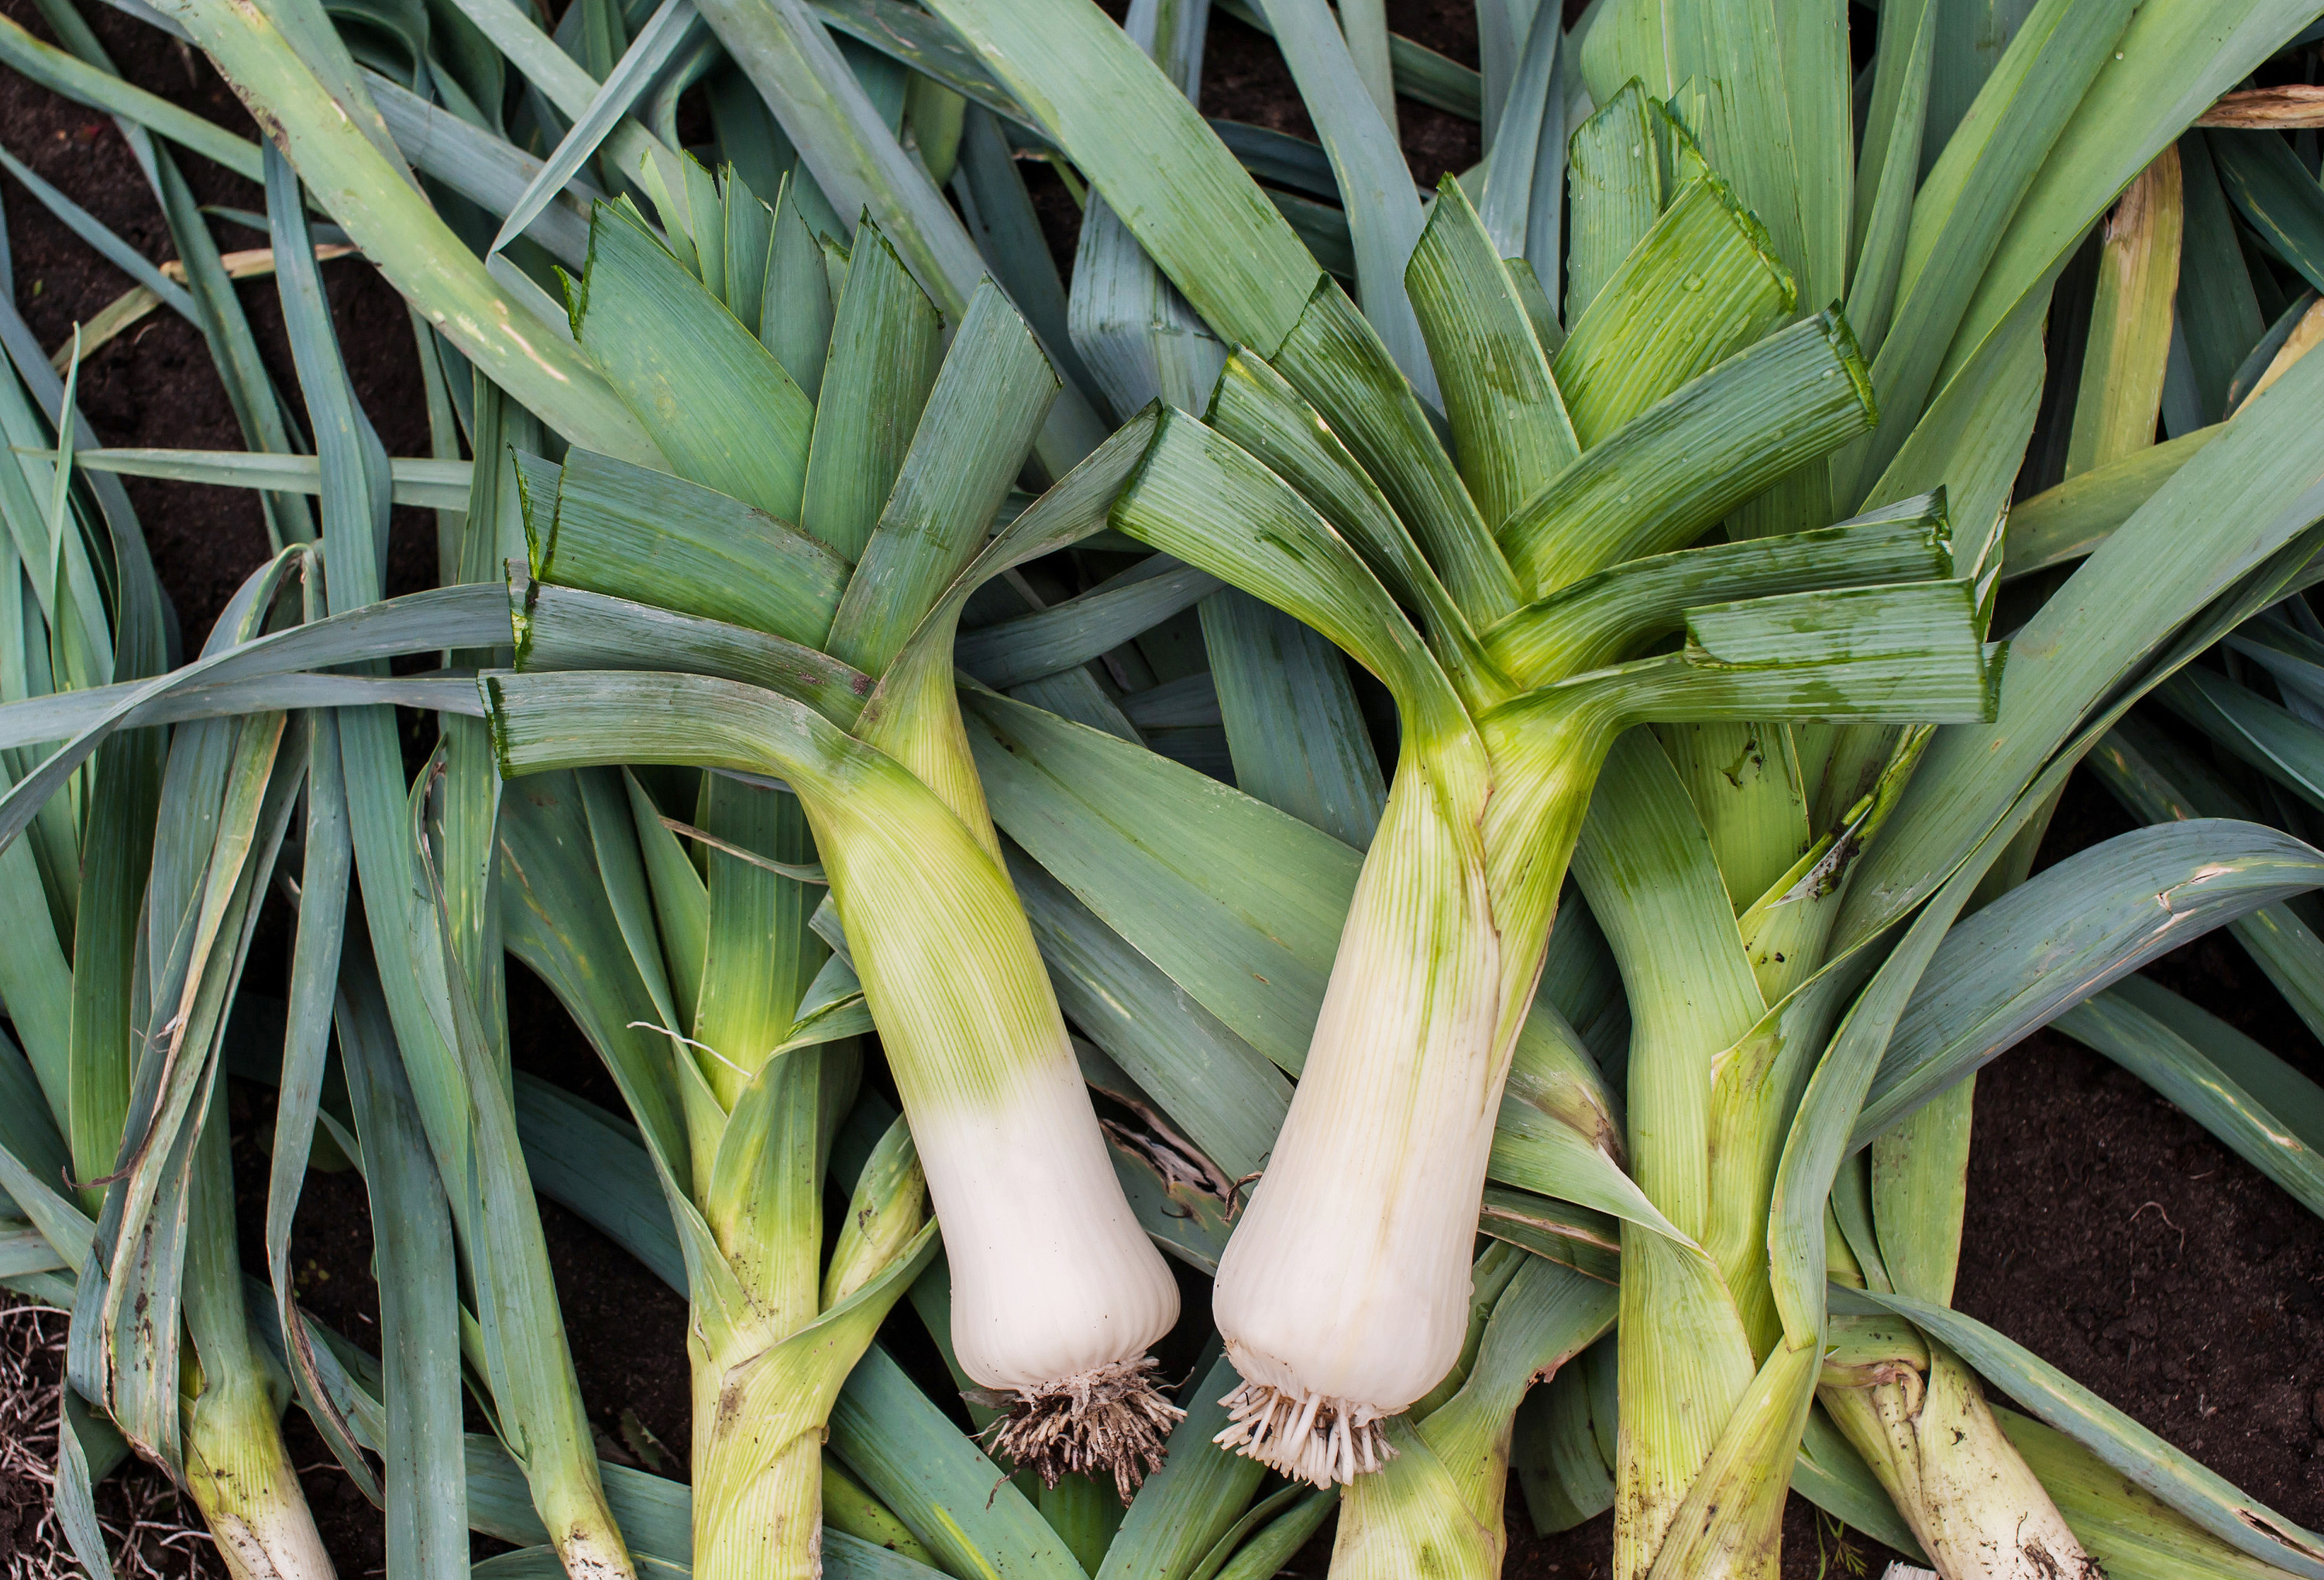 Harvesting leeks. Lots of large ripe leeks are lying on the ground. View from above.